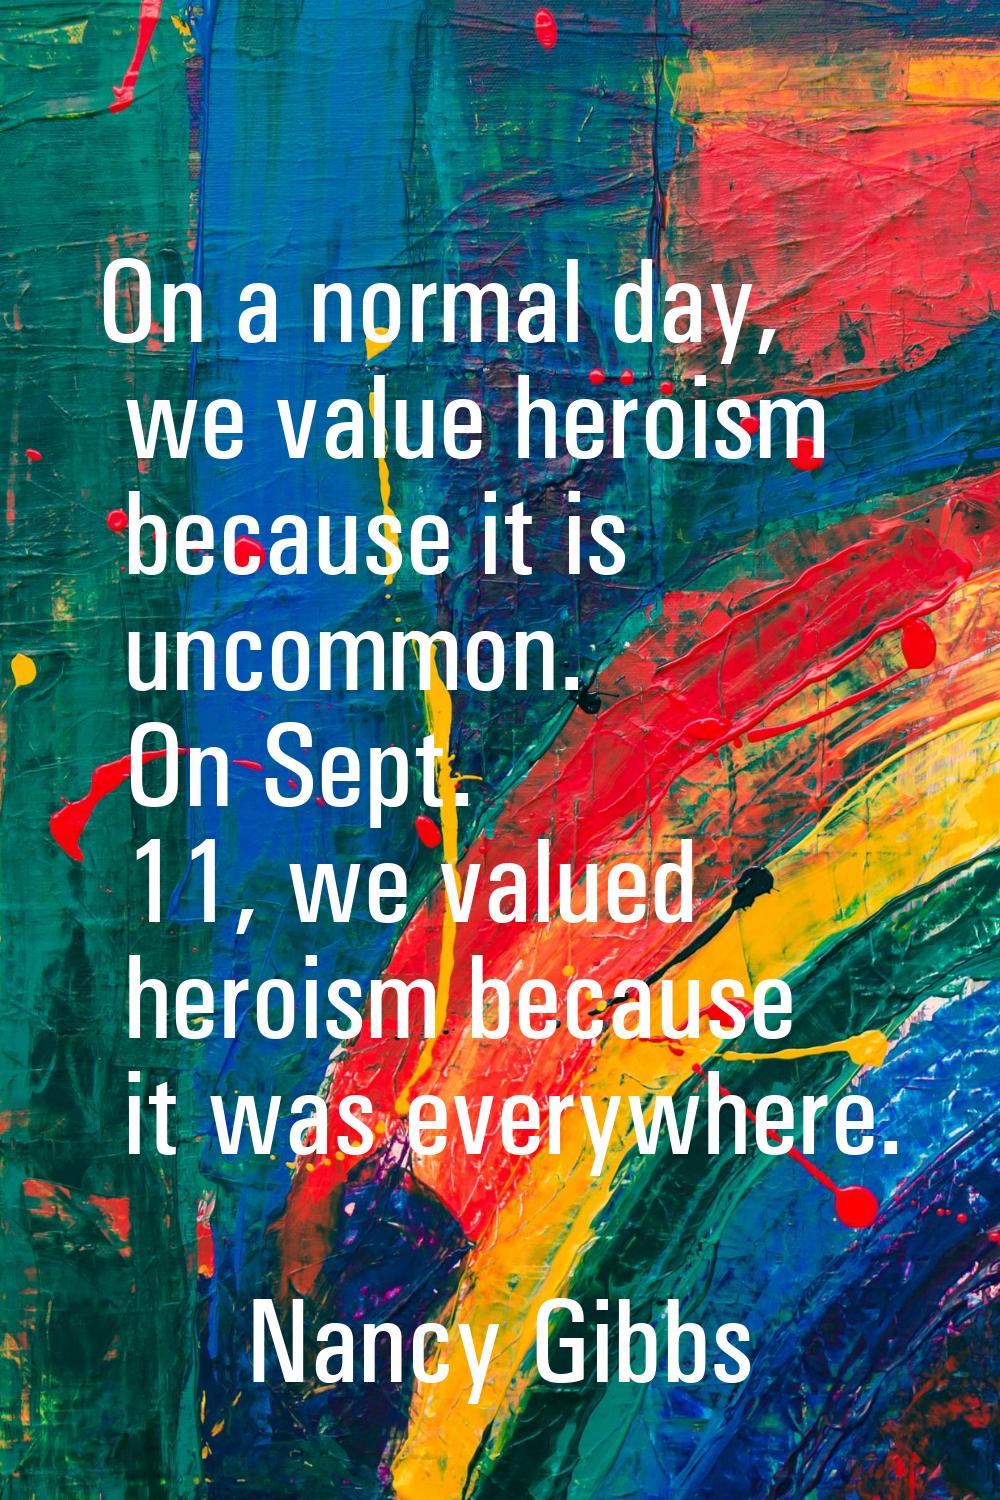 On a normal day, we value heroism because it is uncommon. On Sept. 11, we valued heroism because it